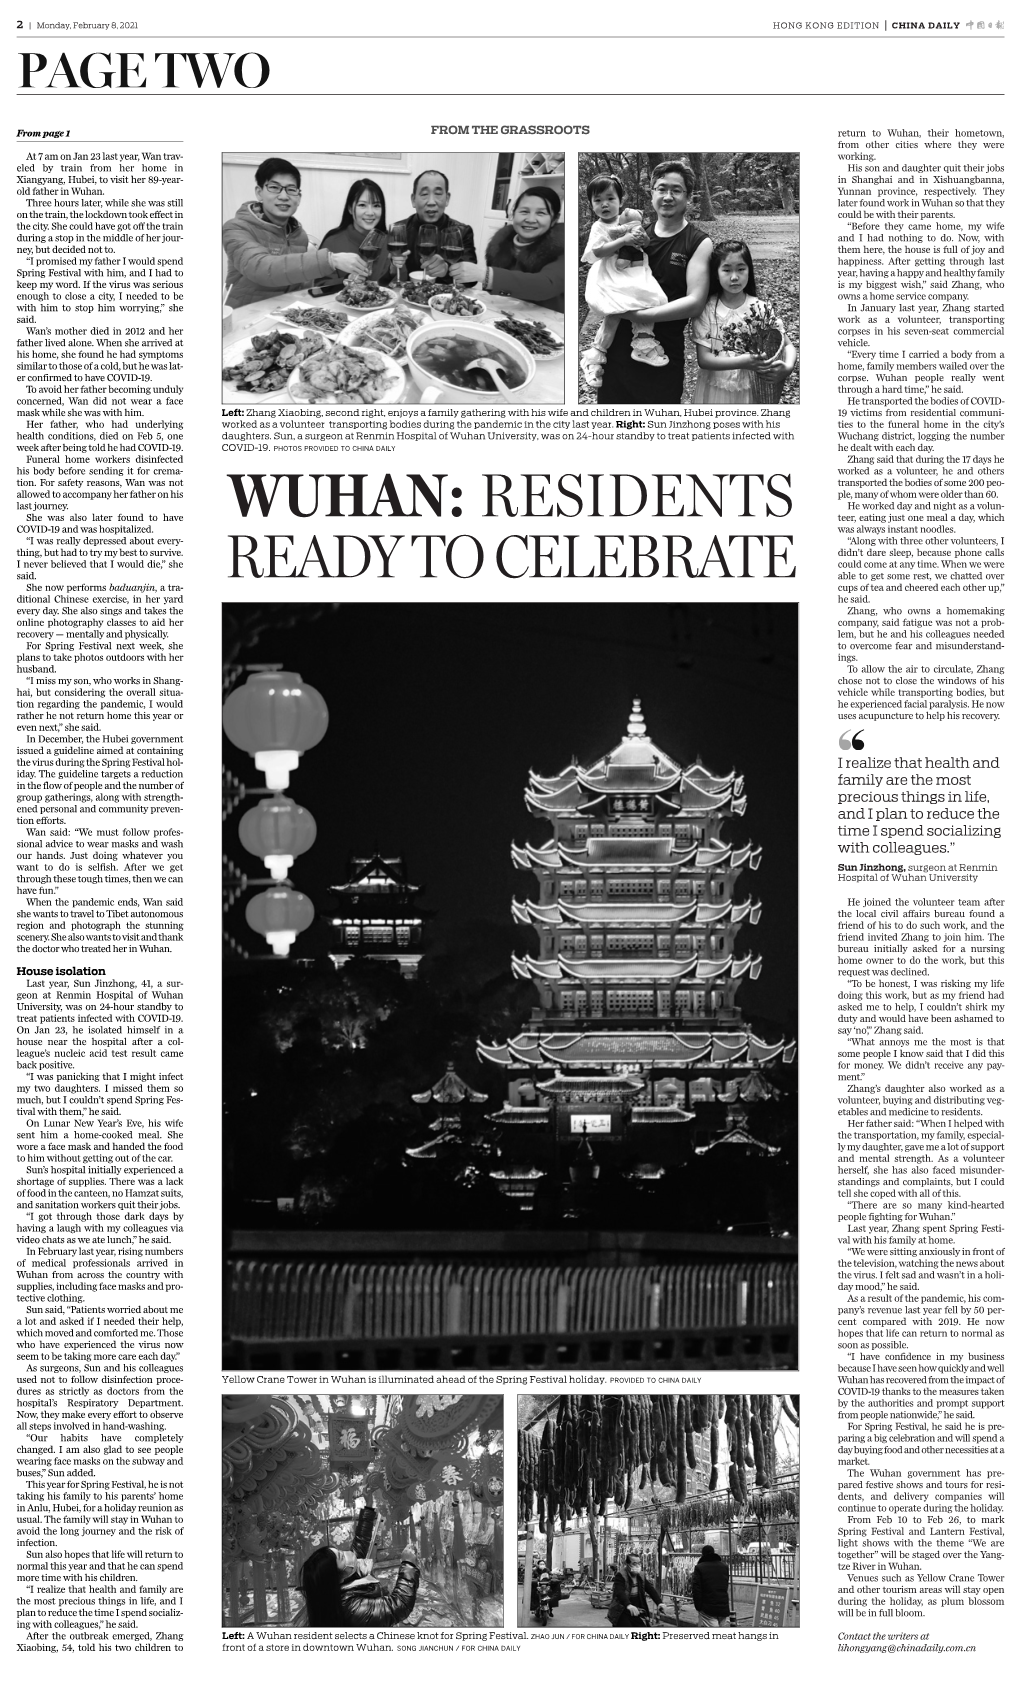 Wuhan, Their Hometown, from Other Cities Where They Were at 7 Am on Jan 23 Last Year, Wan Trav­ Working